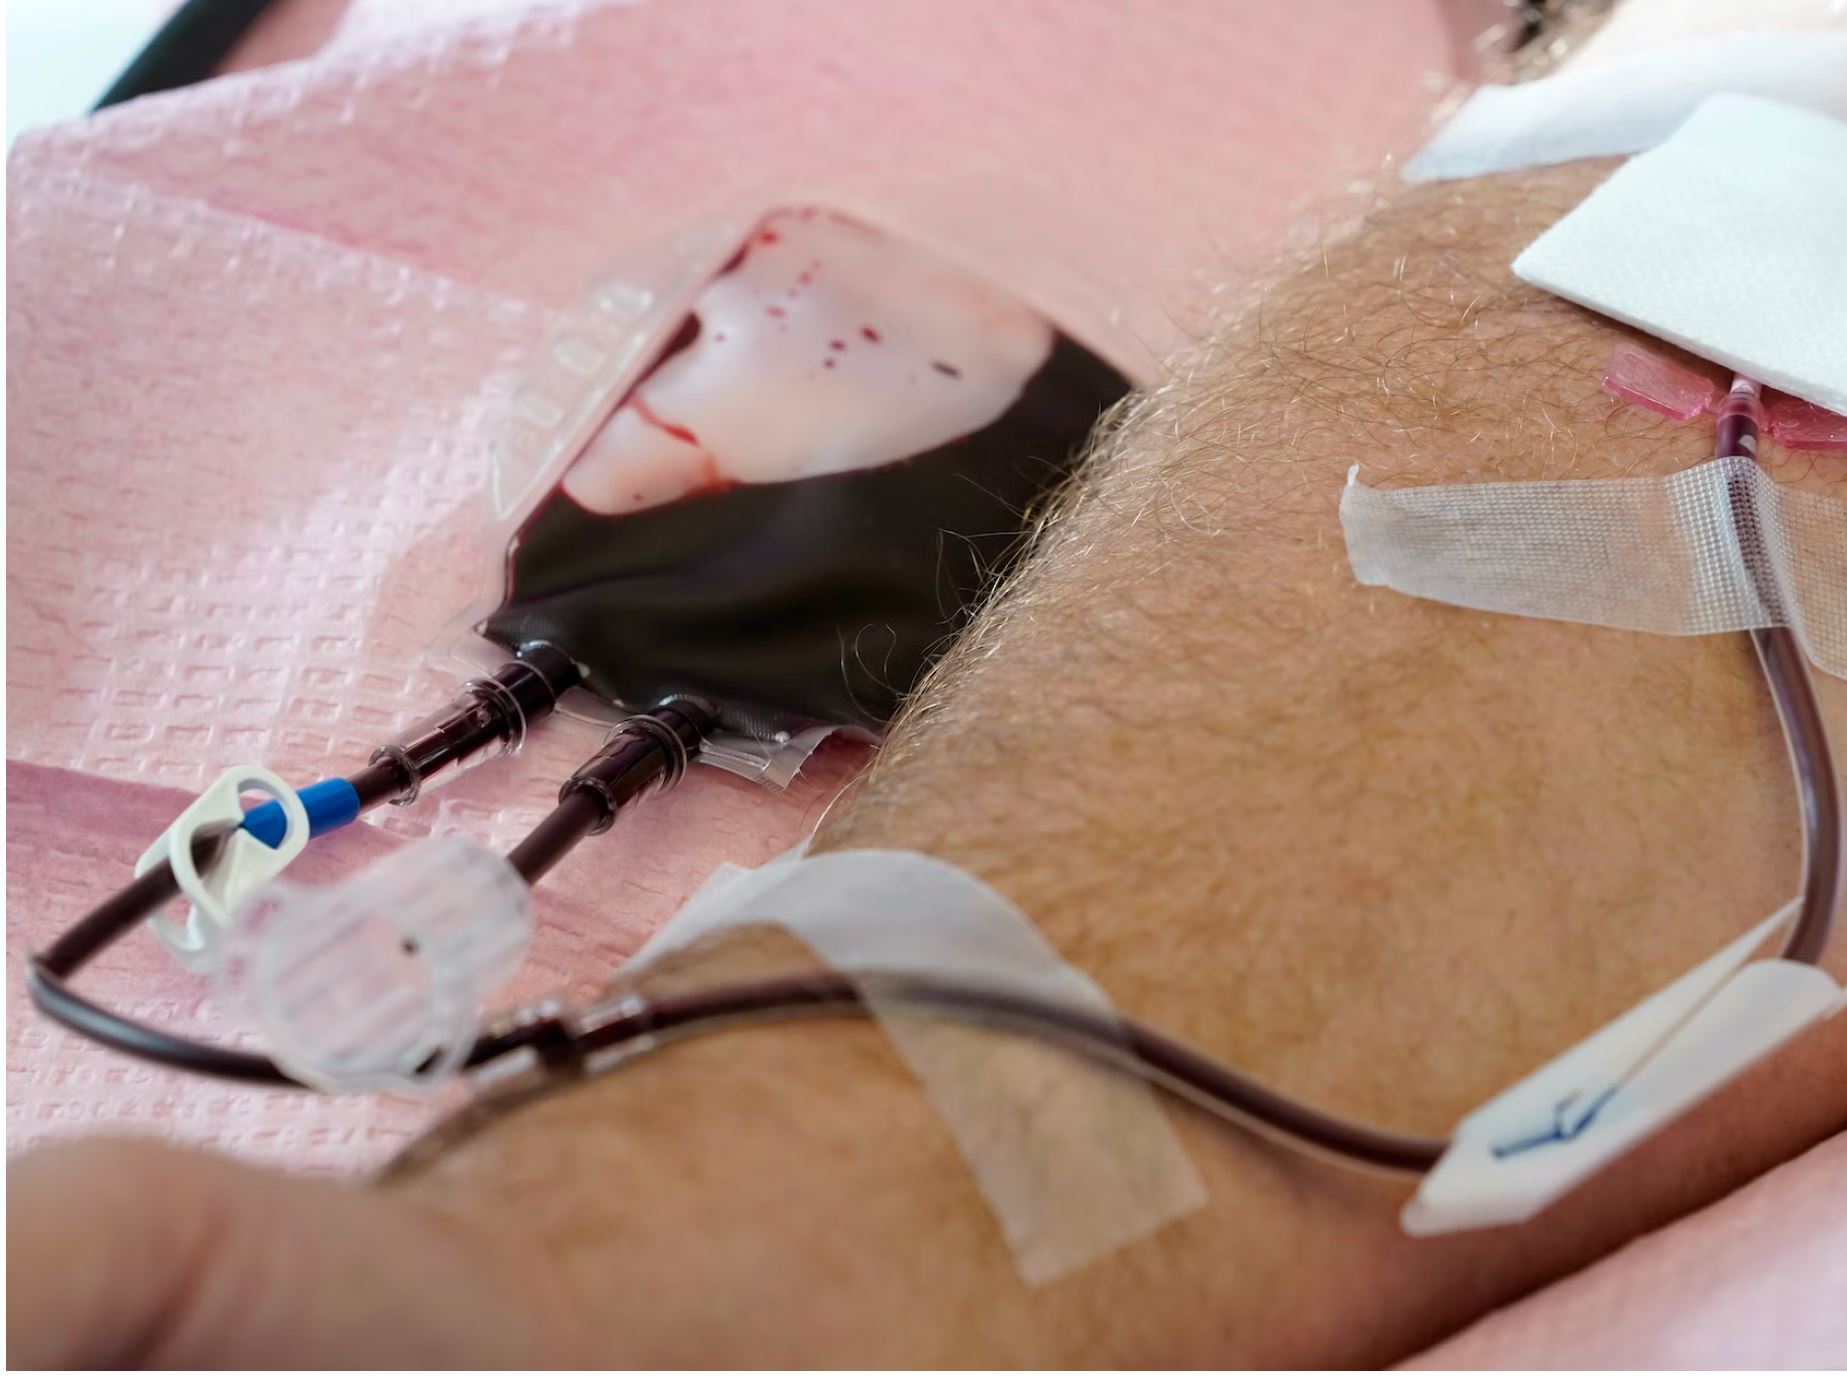 The U.S. is moving to ease restrictions on blood donations from gay and bisexual men and other groups that traditionally face higher risks of HIV.